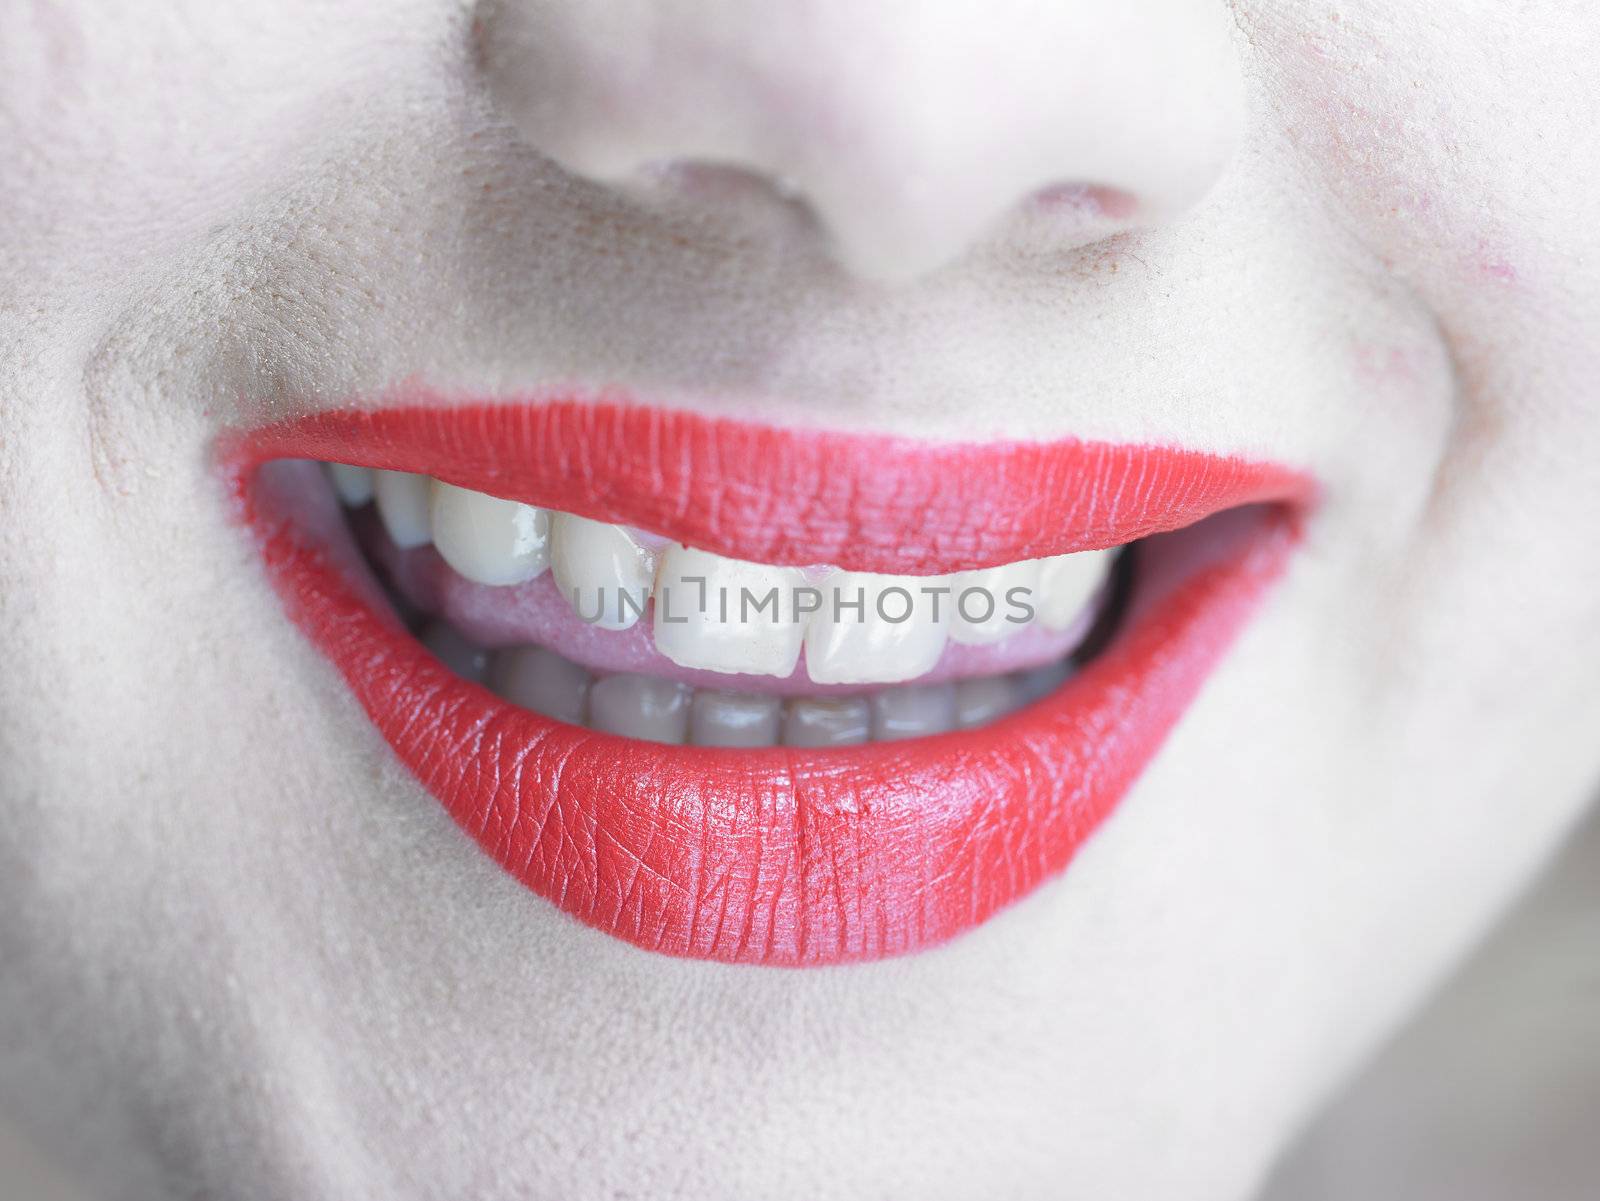 Smile - Thoungue behinde teeth and red lips smiling by adamr